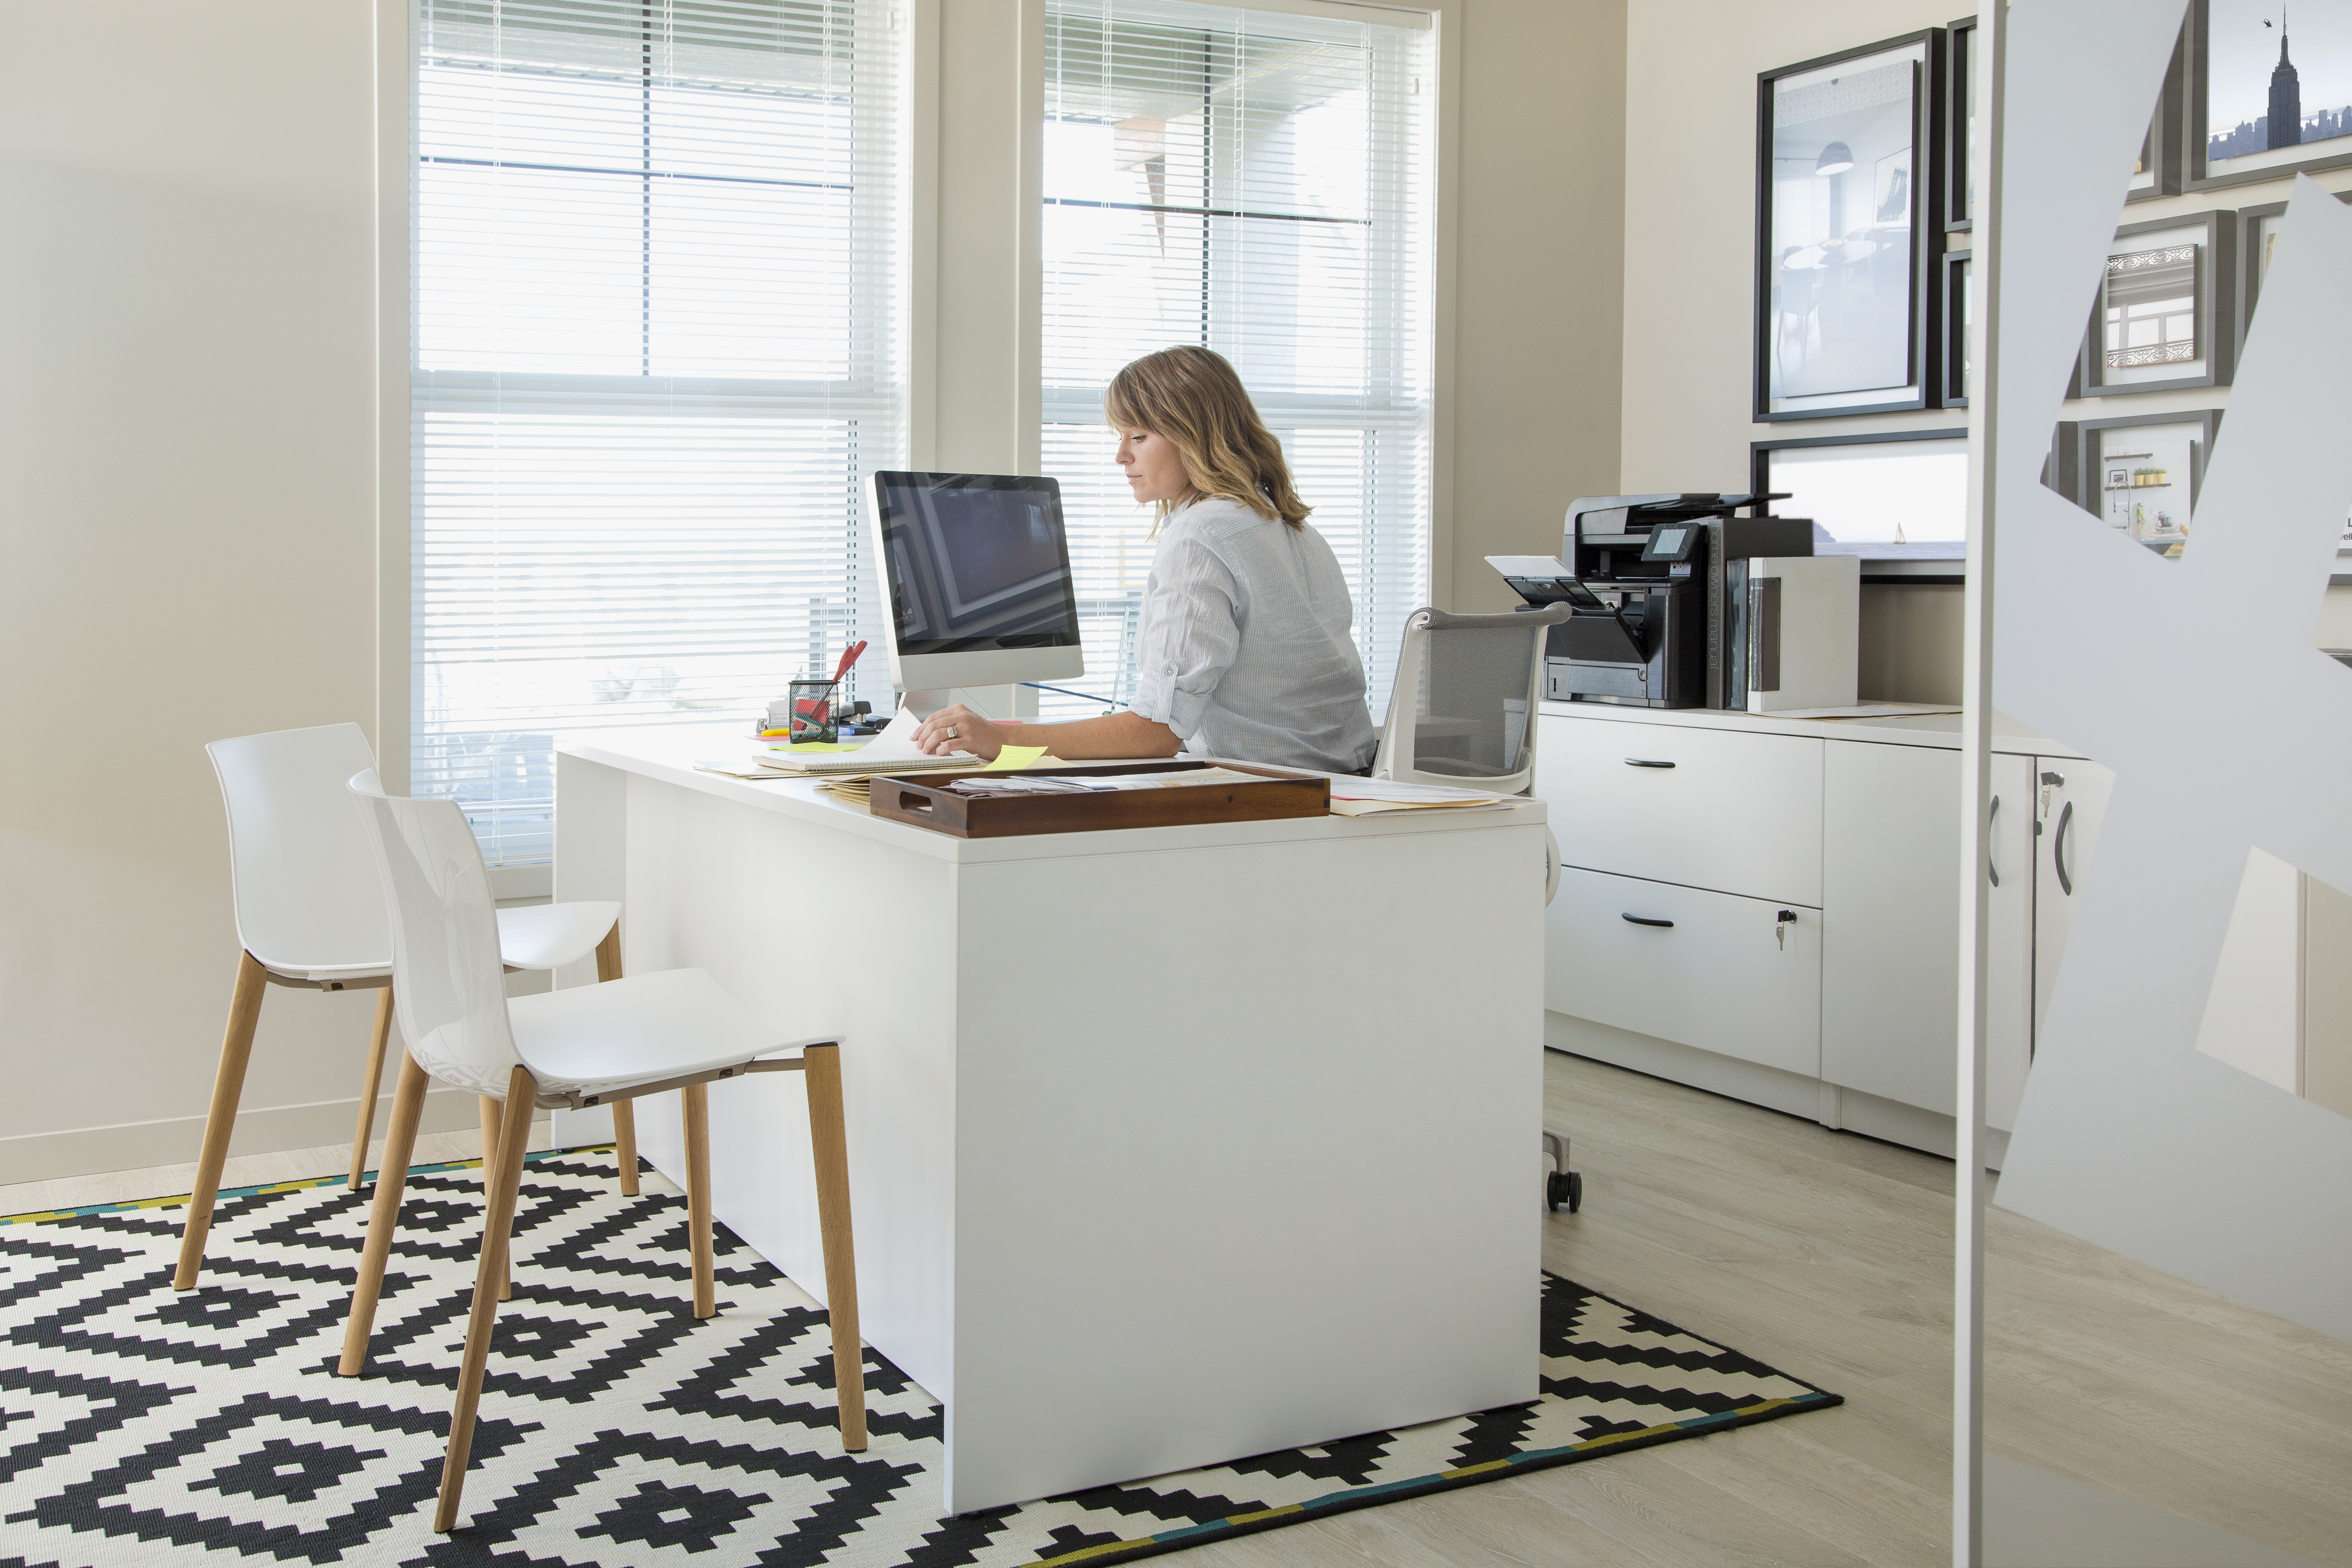 4 Ways To Stay On Your Company’s Radar Even When You Work Remotely